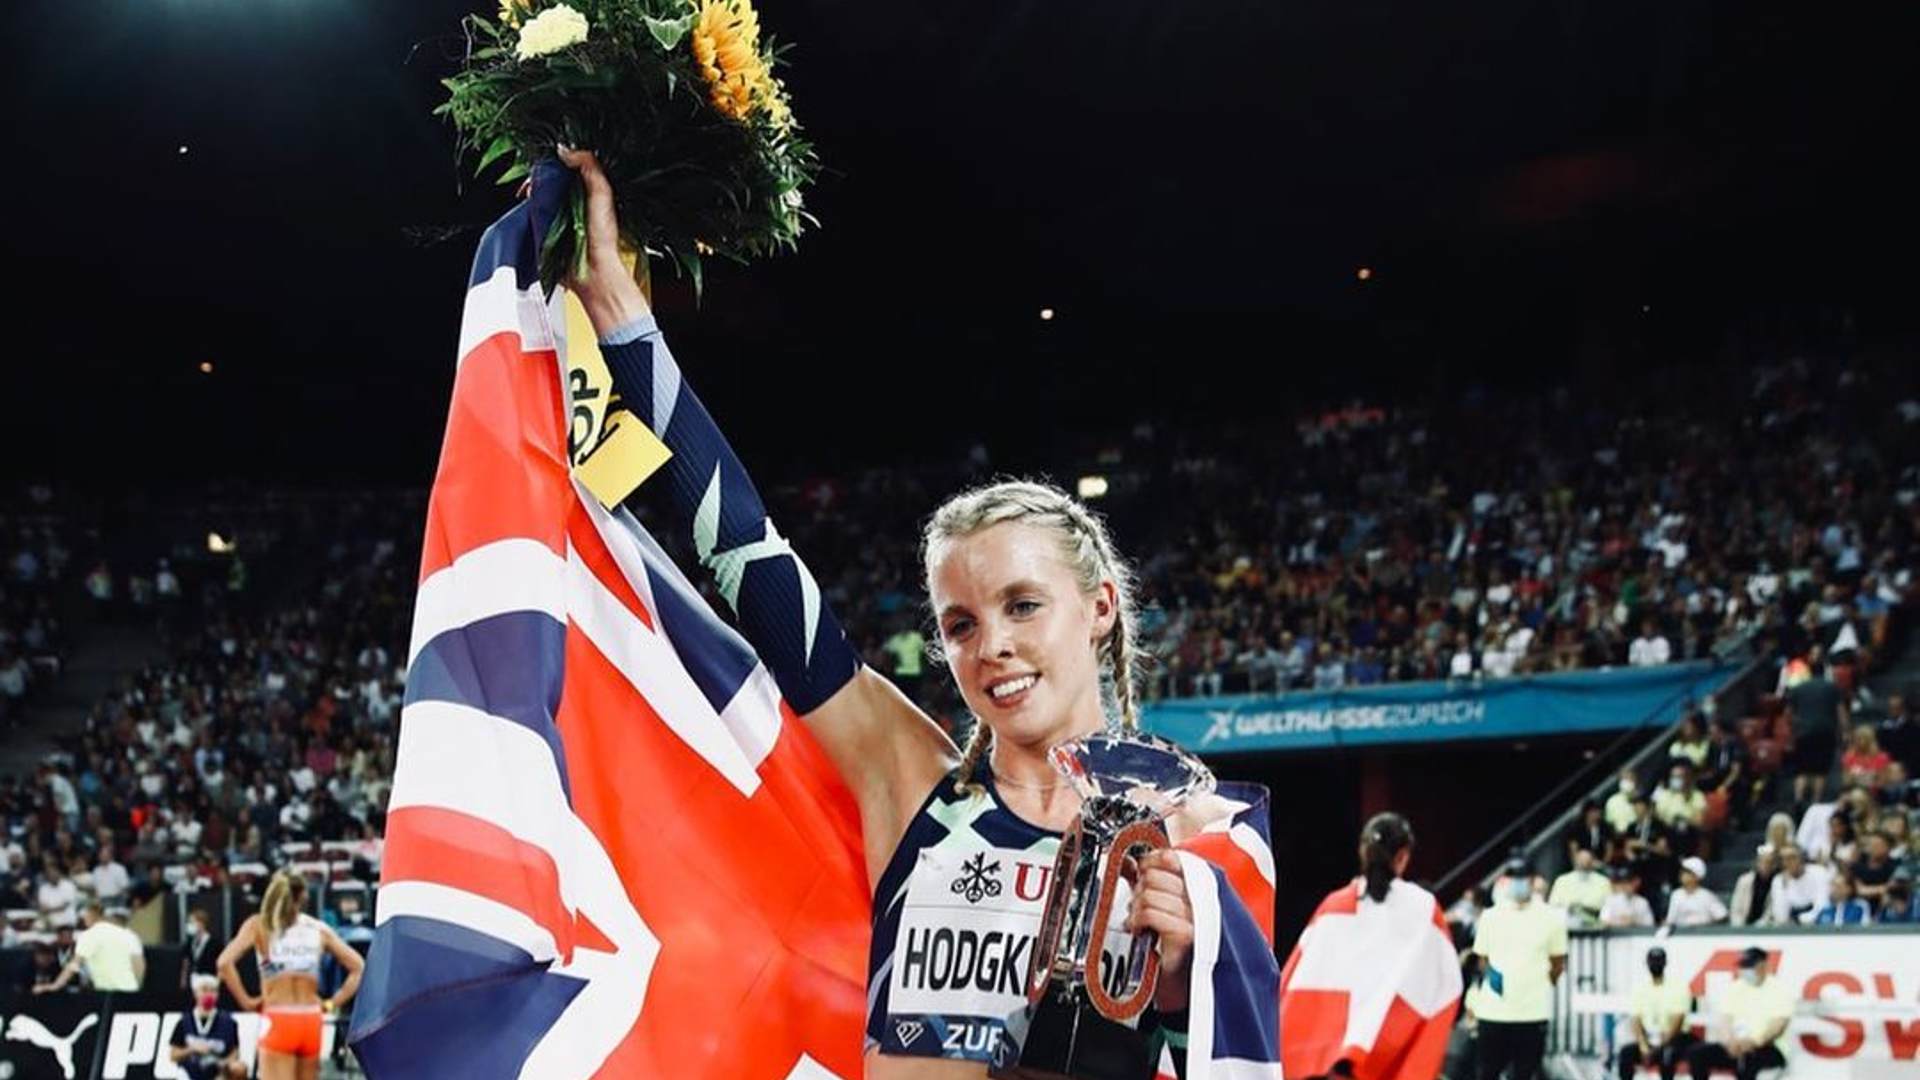 Keely Hodgkinson after winning her first diamond league title in 2021 (Image Credits - Instagram/ @keely.hodgkinson)